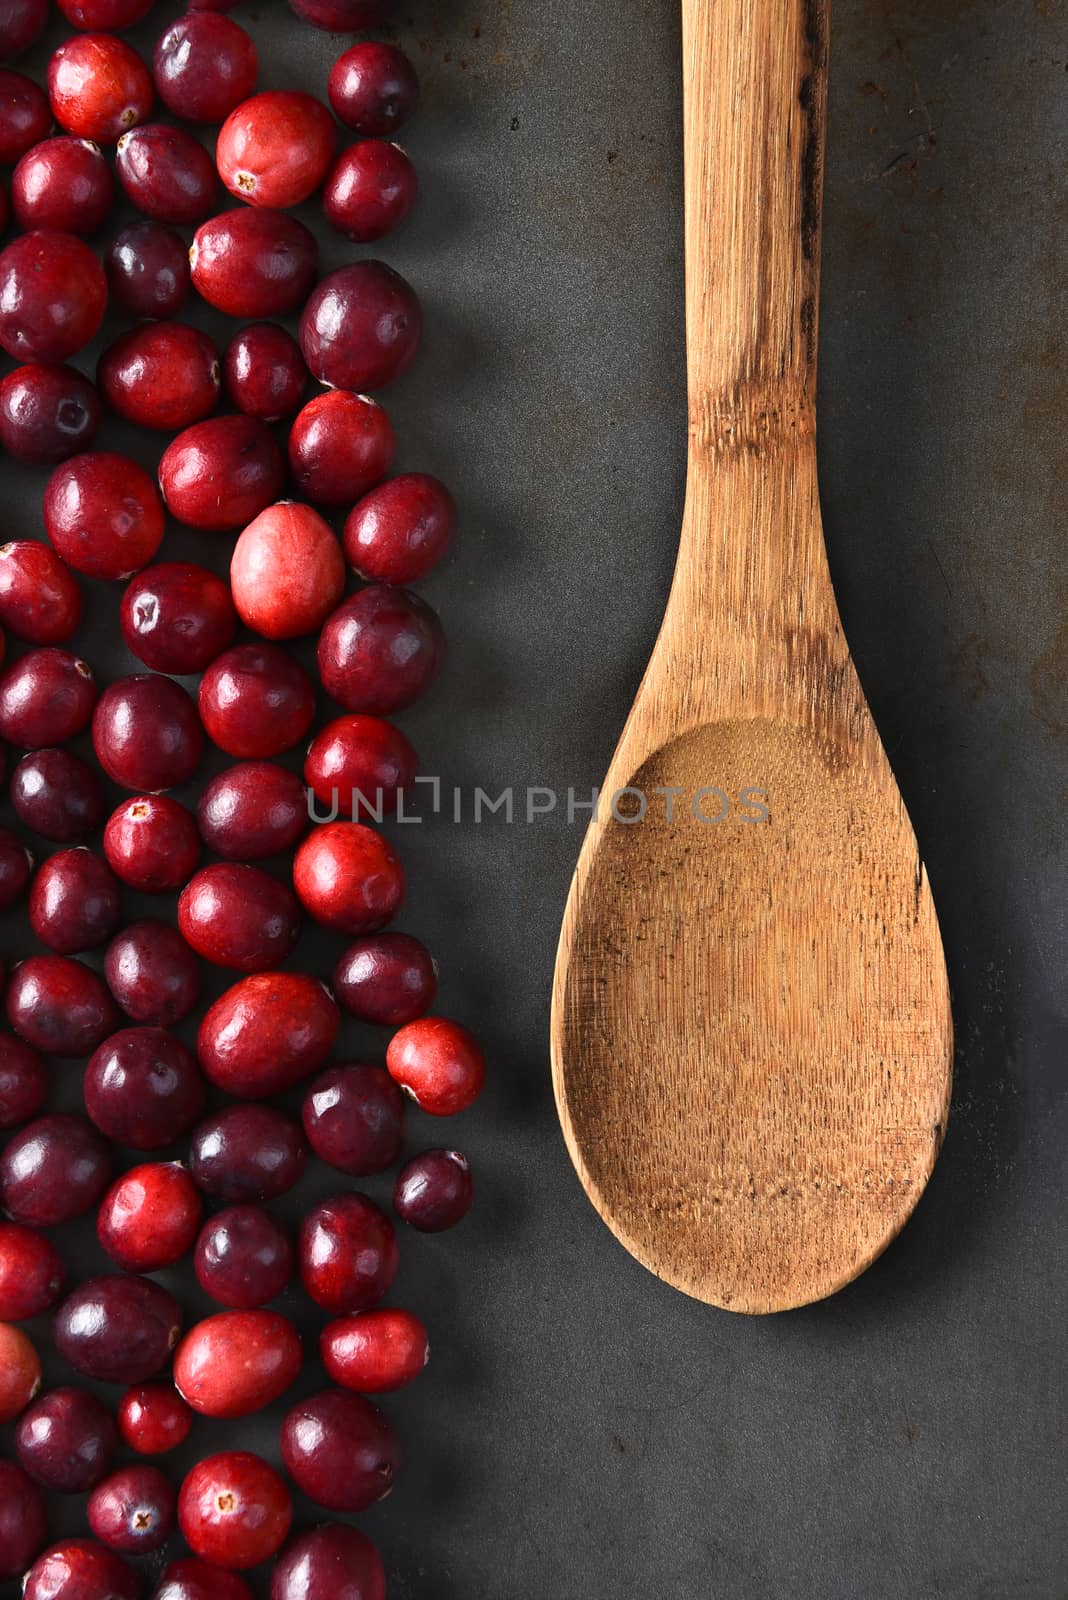 High angle view of fresh whole cranberries and a wooden spoon on a metal baking sheet. Vertical format.